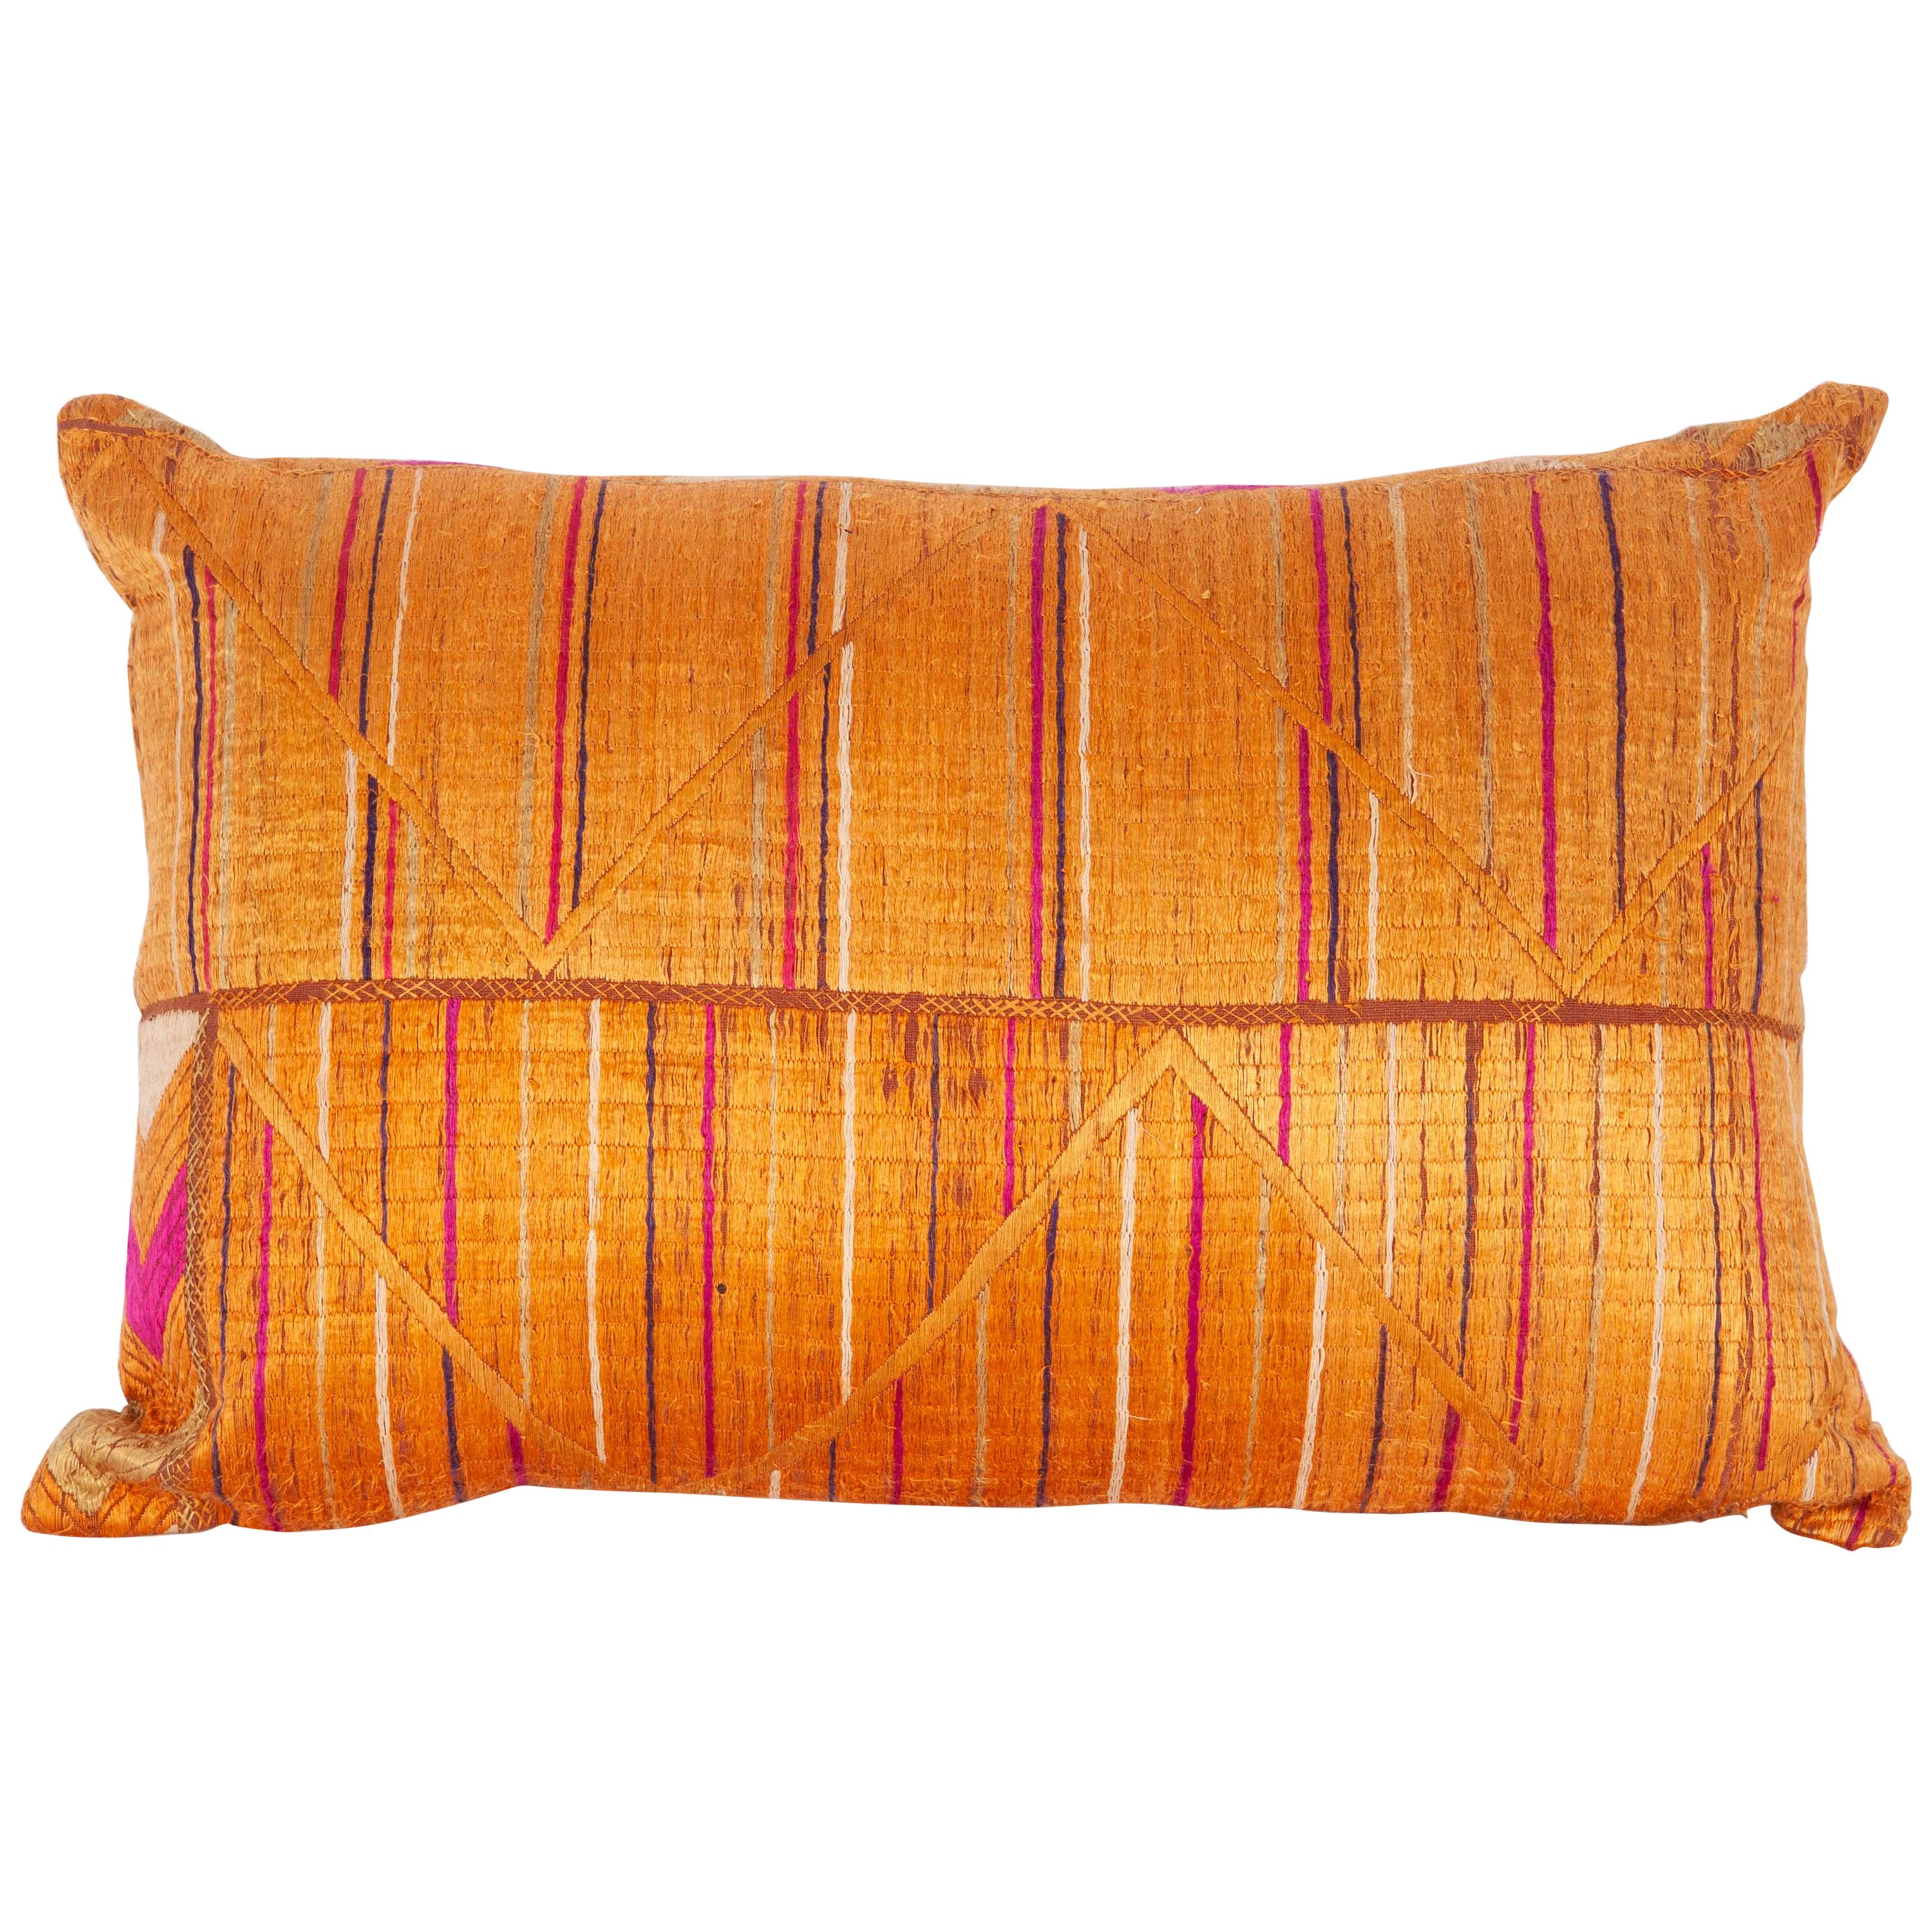 Pillow Case Fashioned from a Phulkari 'Wedding Shawl' from India, 20th Century For Sale